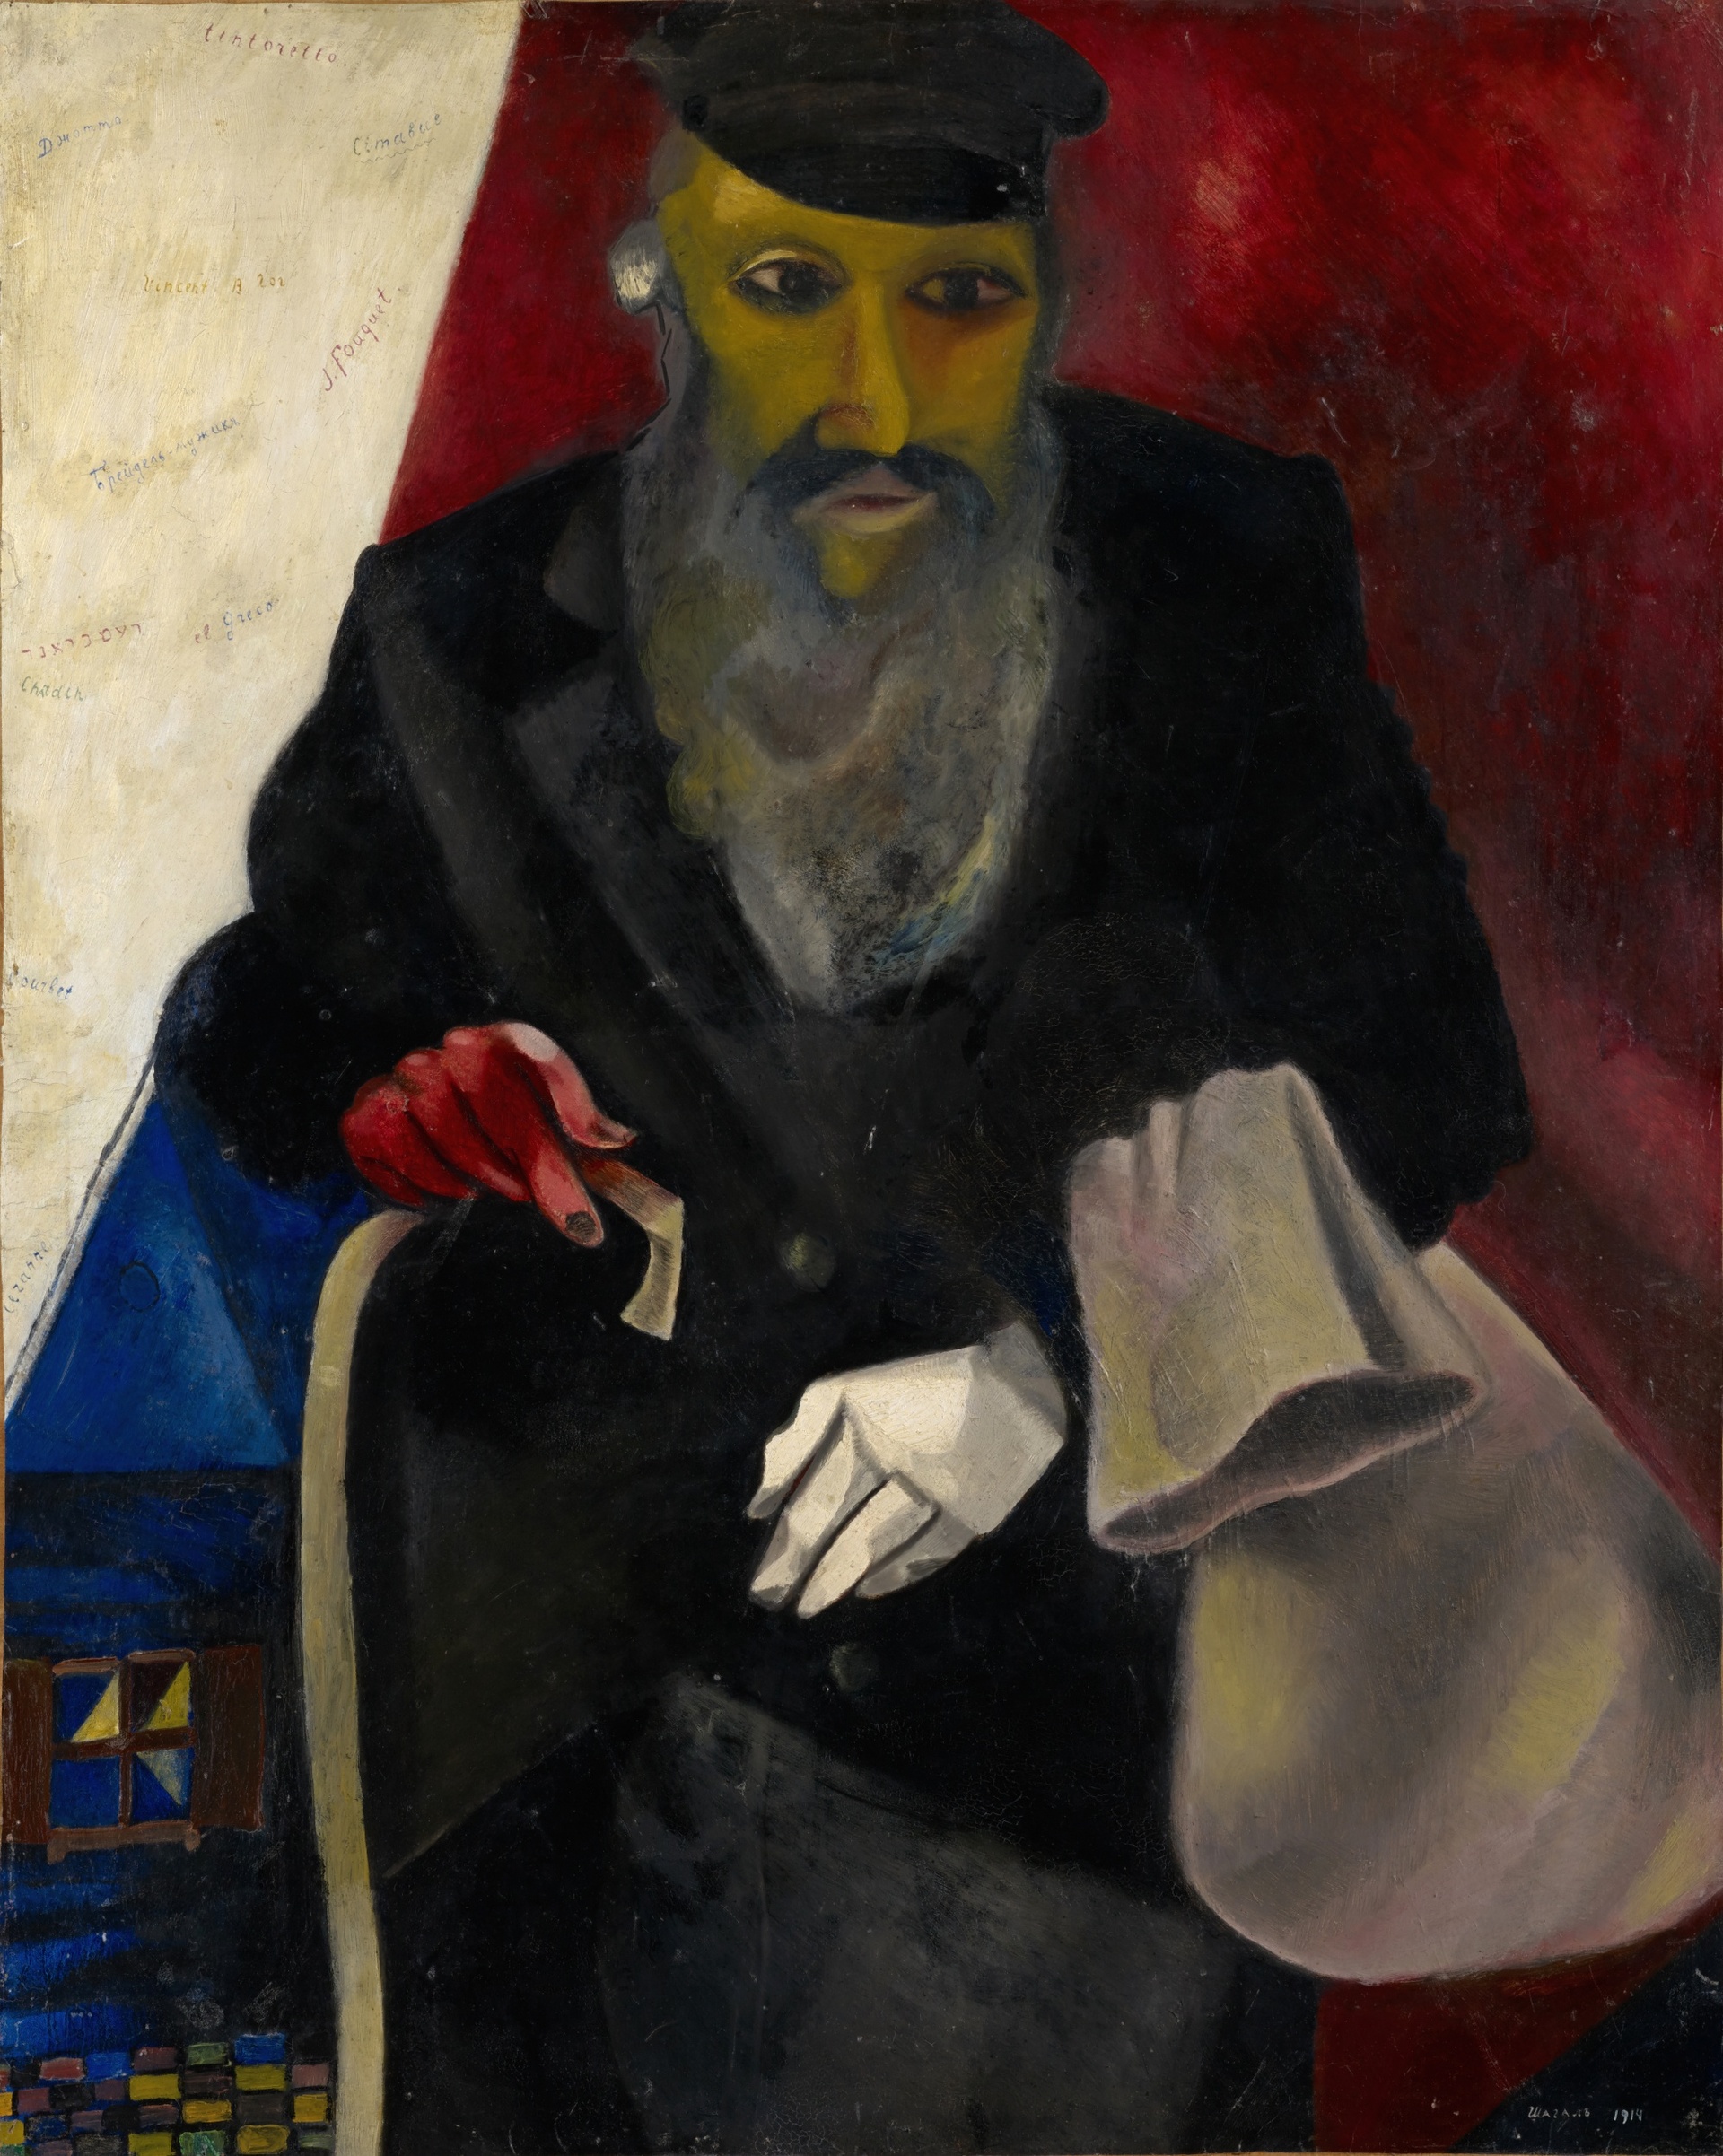 Marc Chagall, Jew in Red, 1914</br>Permanent loan of the Im Obersteg Foundation